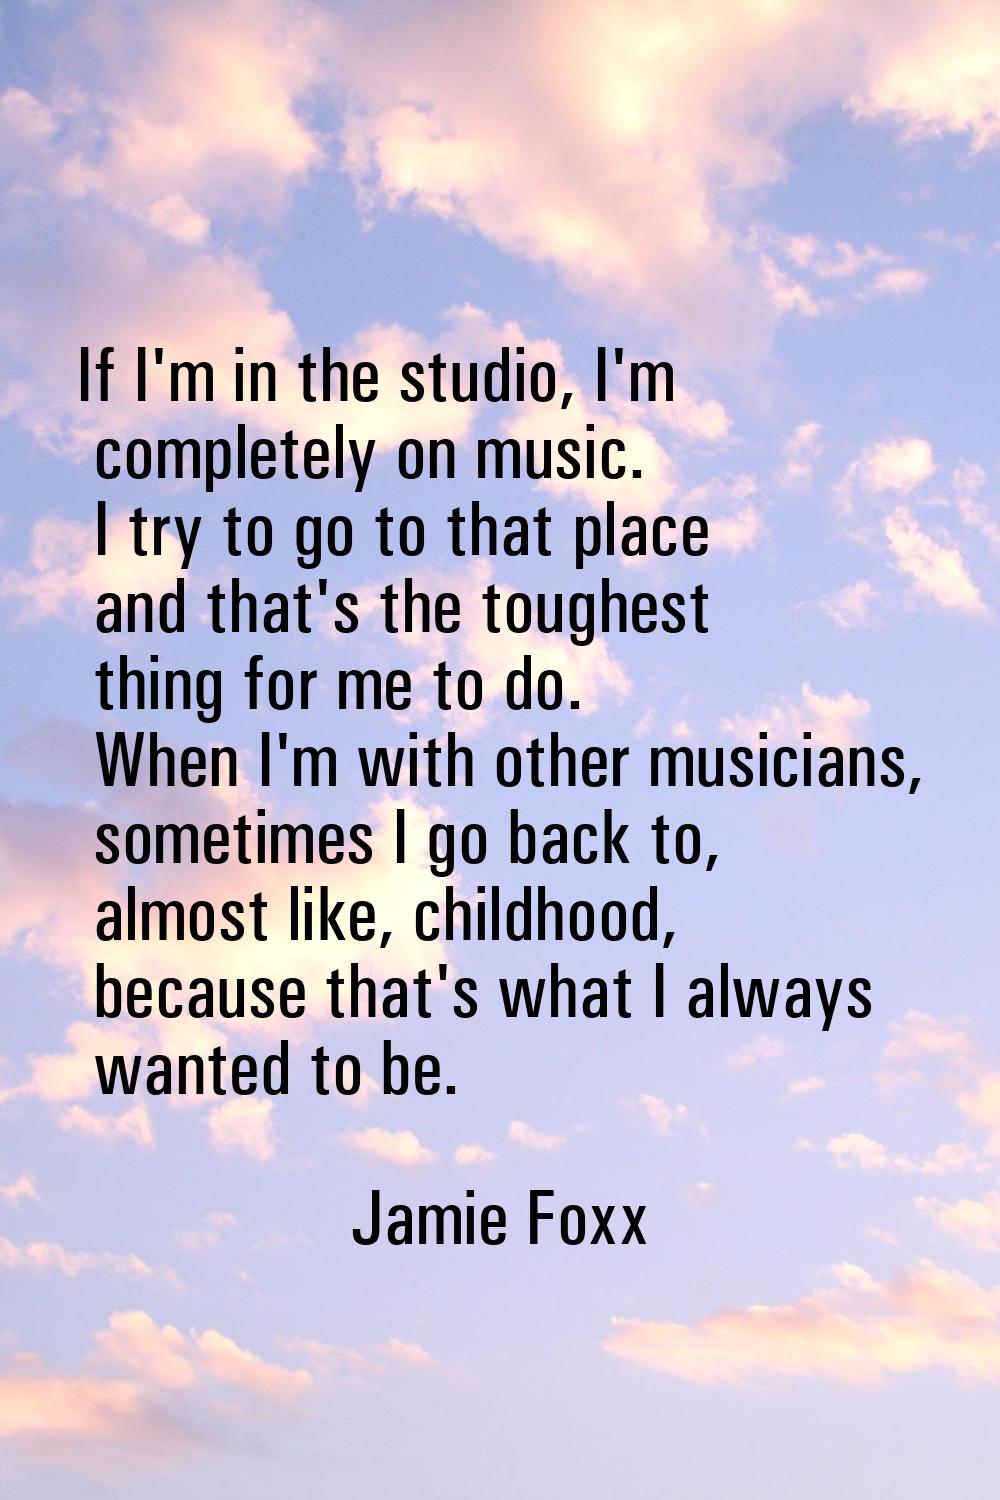 If I'm in the studio, I'm completely on music. I try to go to that place and that's the toughest th